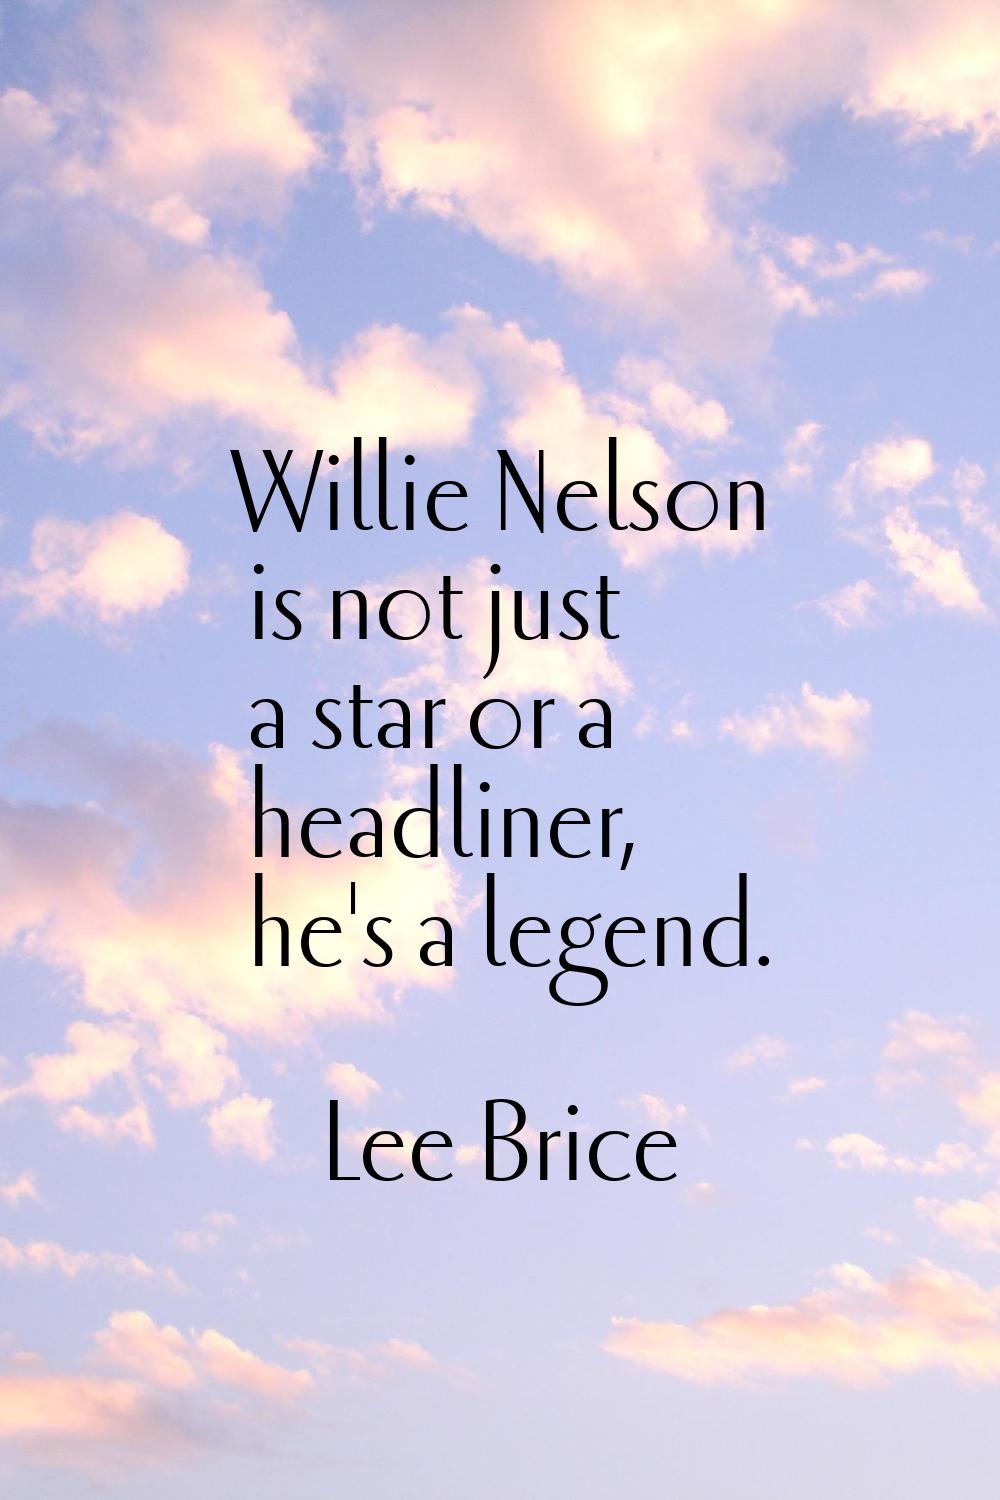 Willie Nelson is not just a star or a headliner, he's a legend.